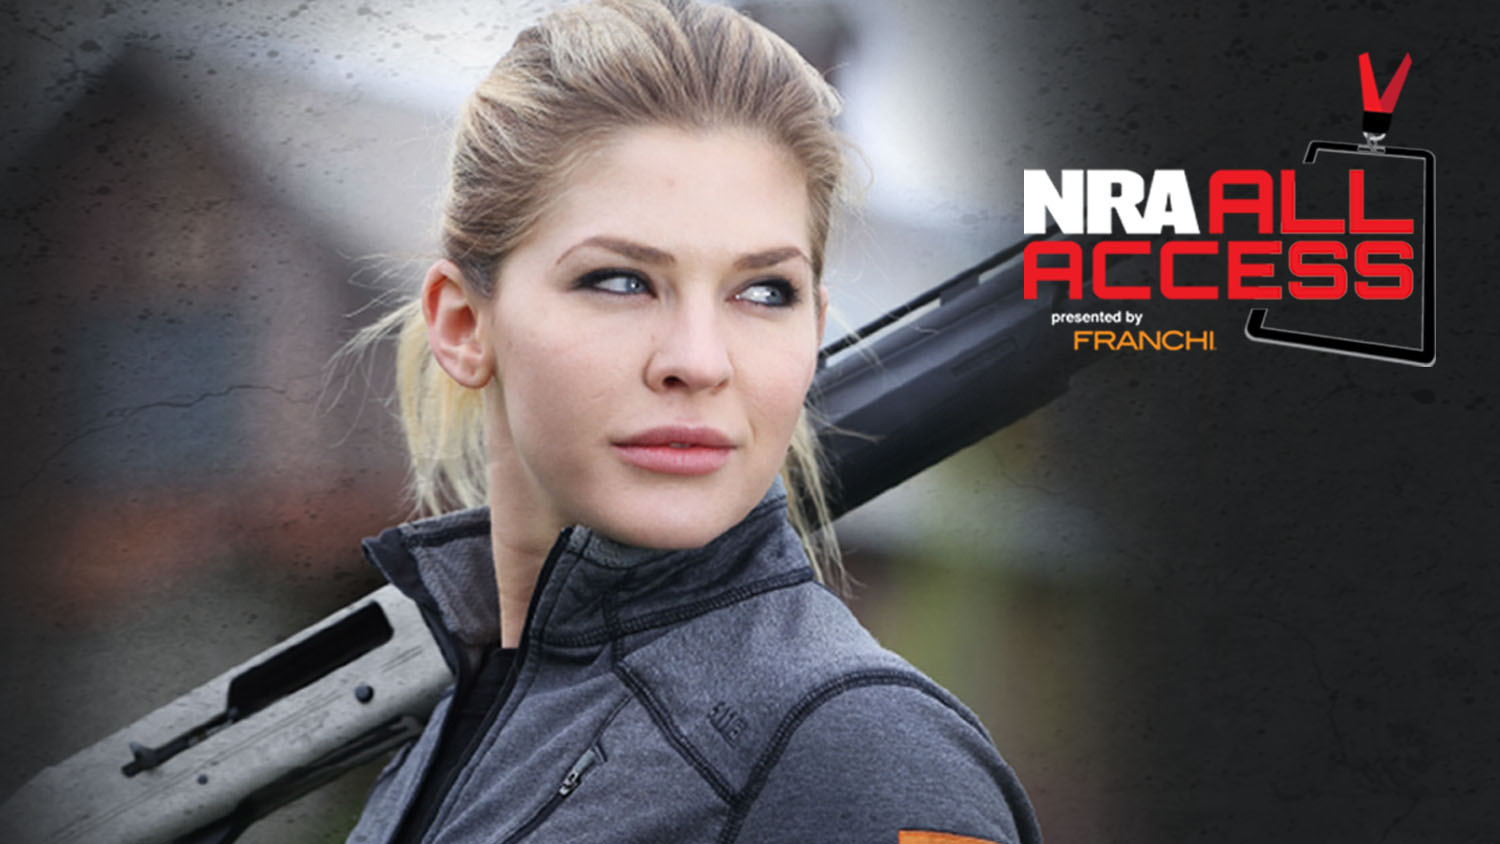 Season 6 of NRA All Access Premieres Wednesday June 29